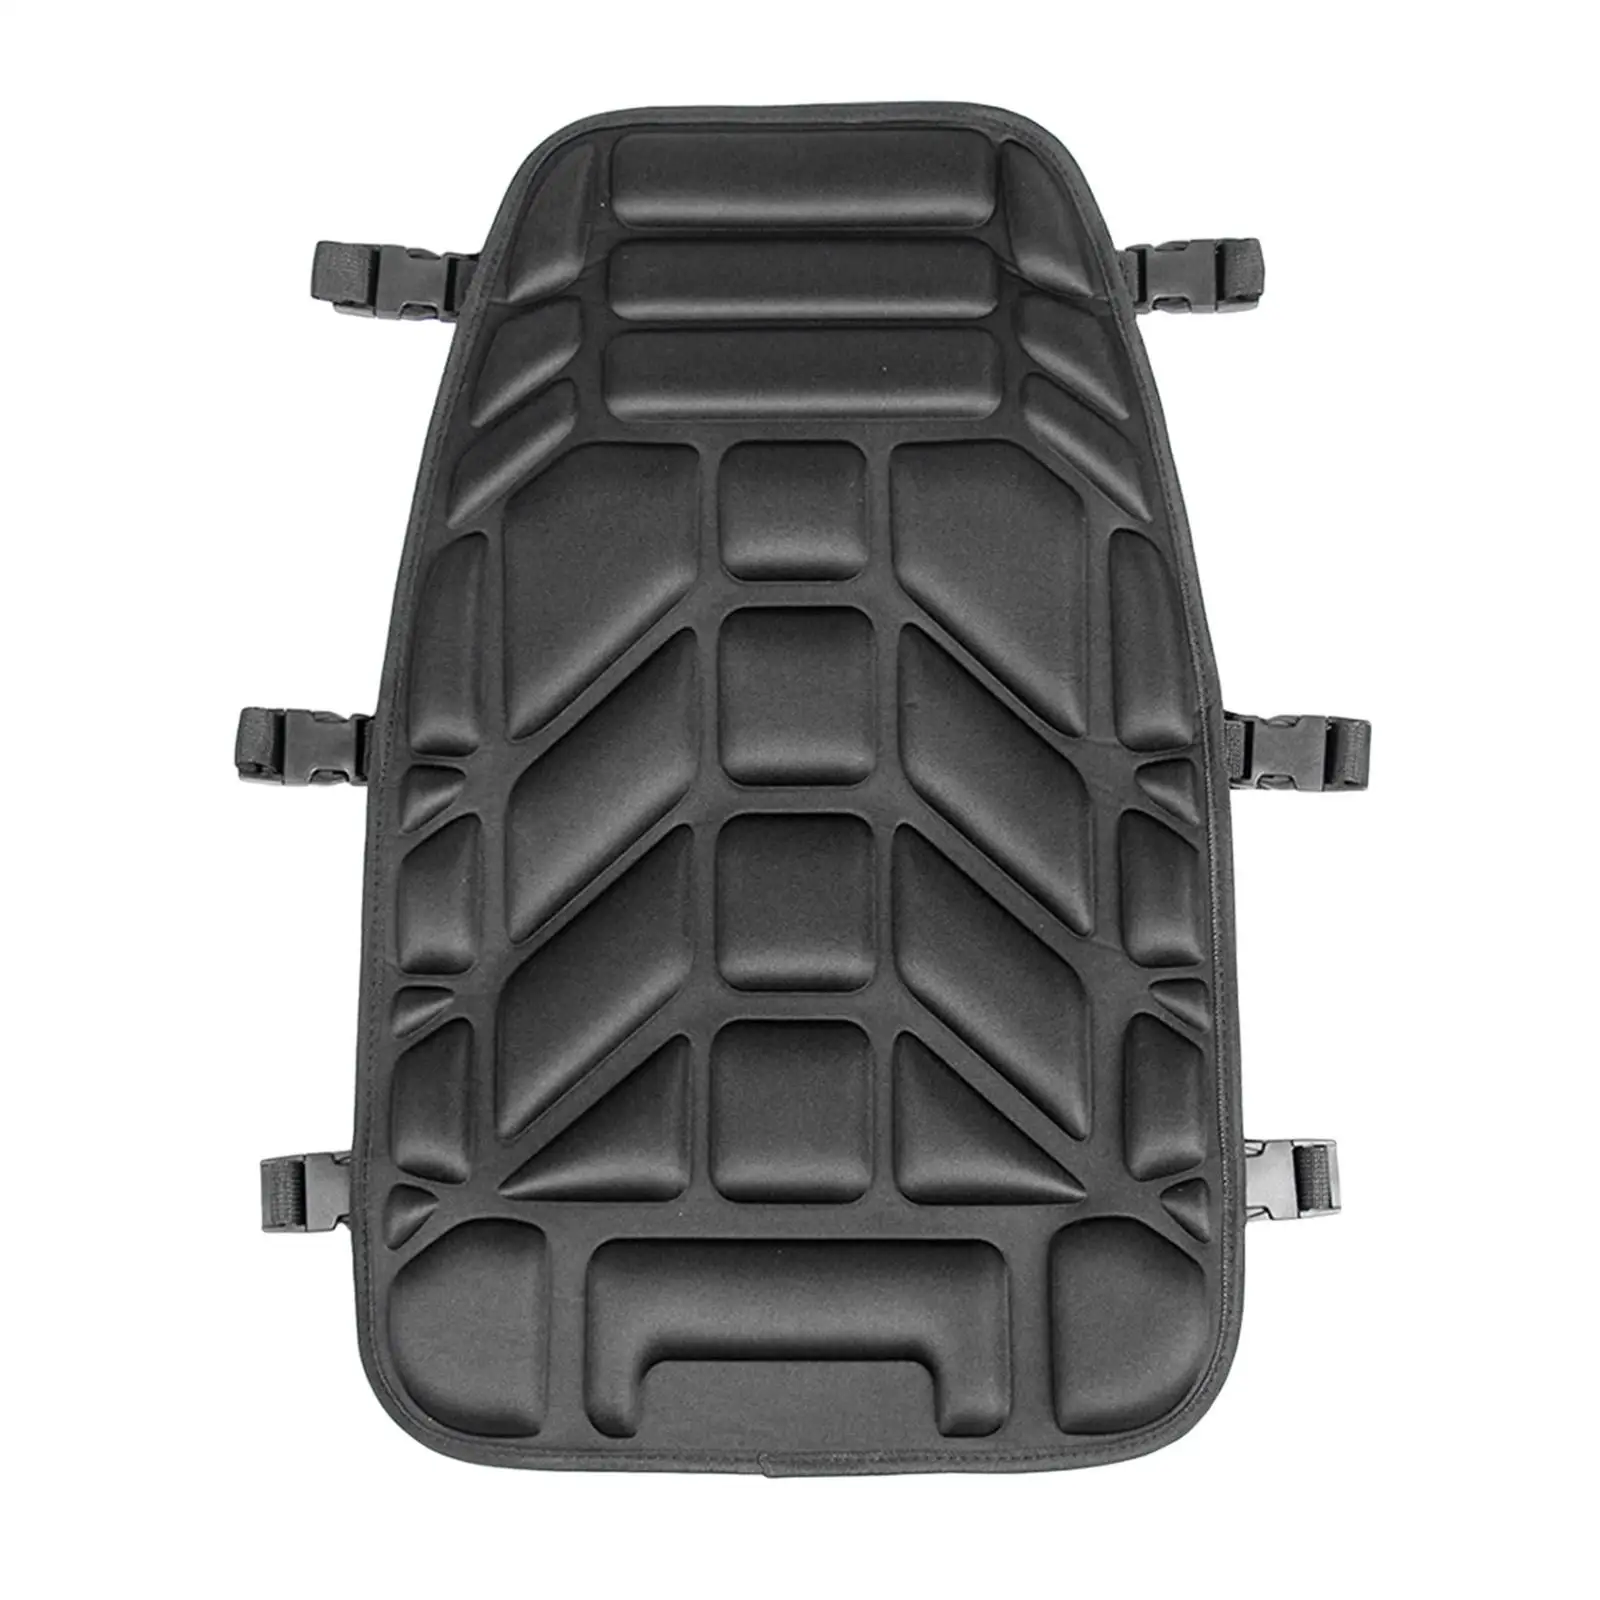 Motorcycle ATV Cushion Sunscreen Protective Adjustable Soft Shock Absorption Seat Mat 3D Pad Fit for ATV Vehicle Street Bikes